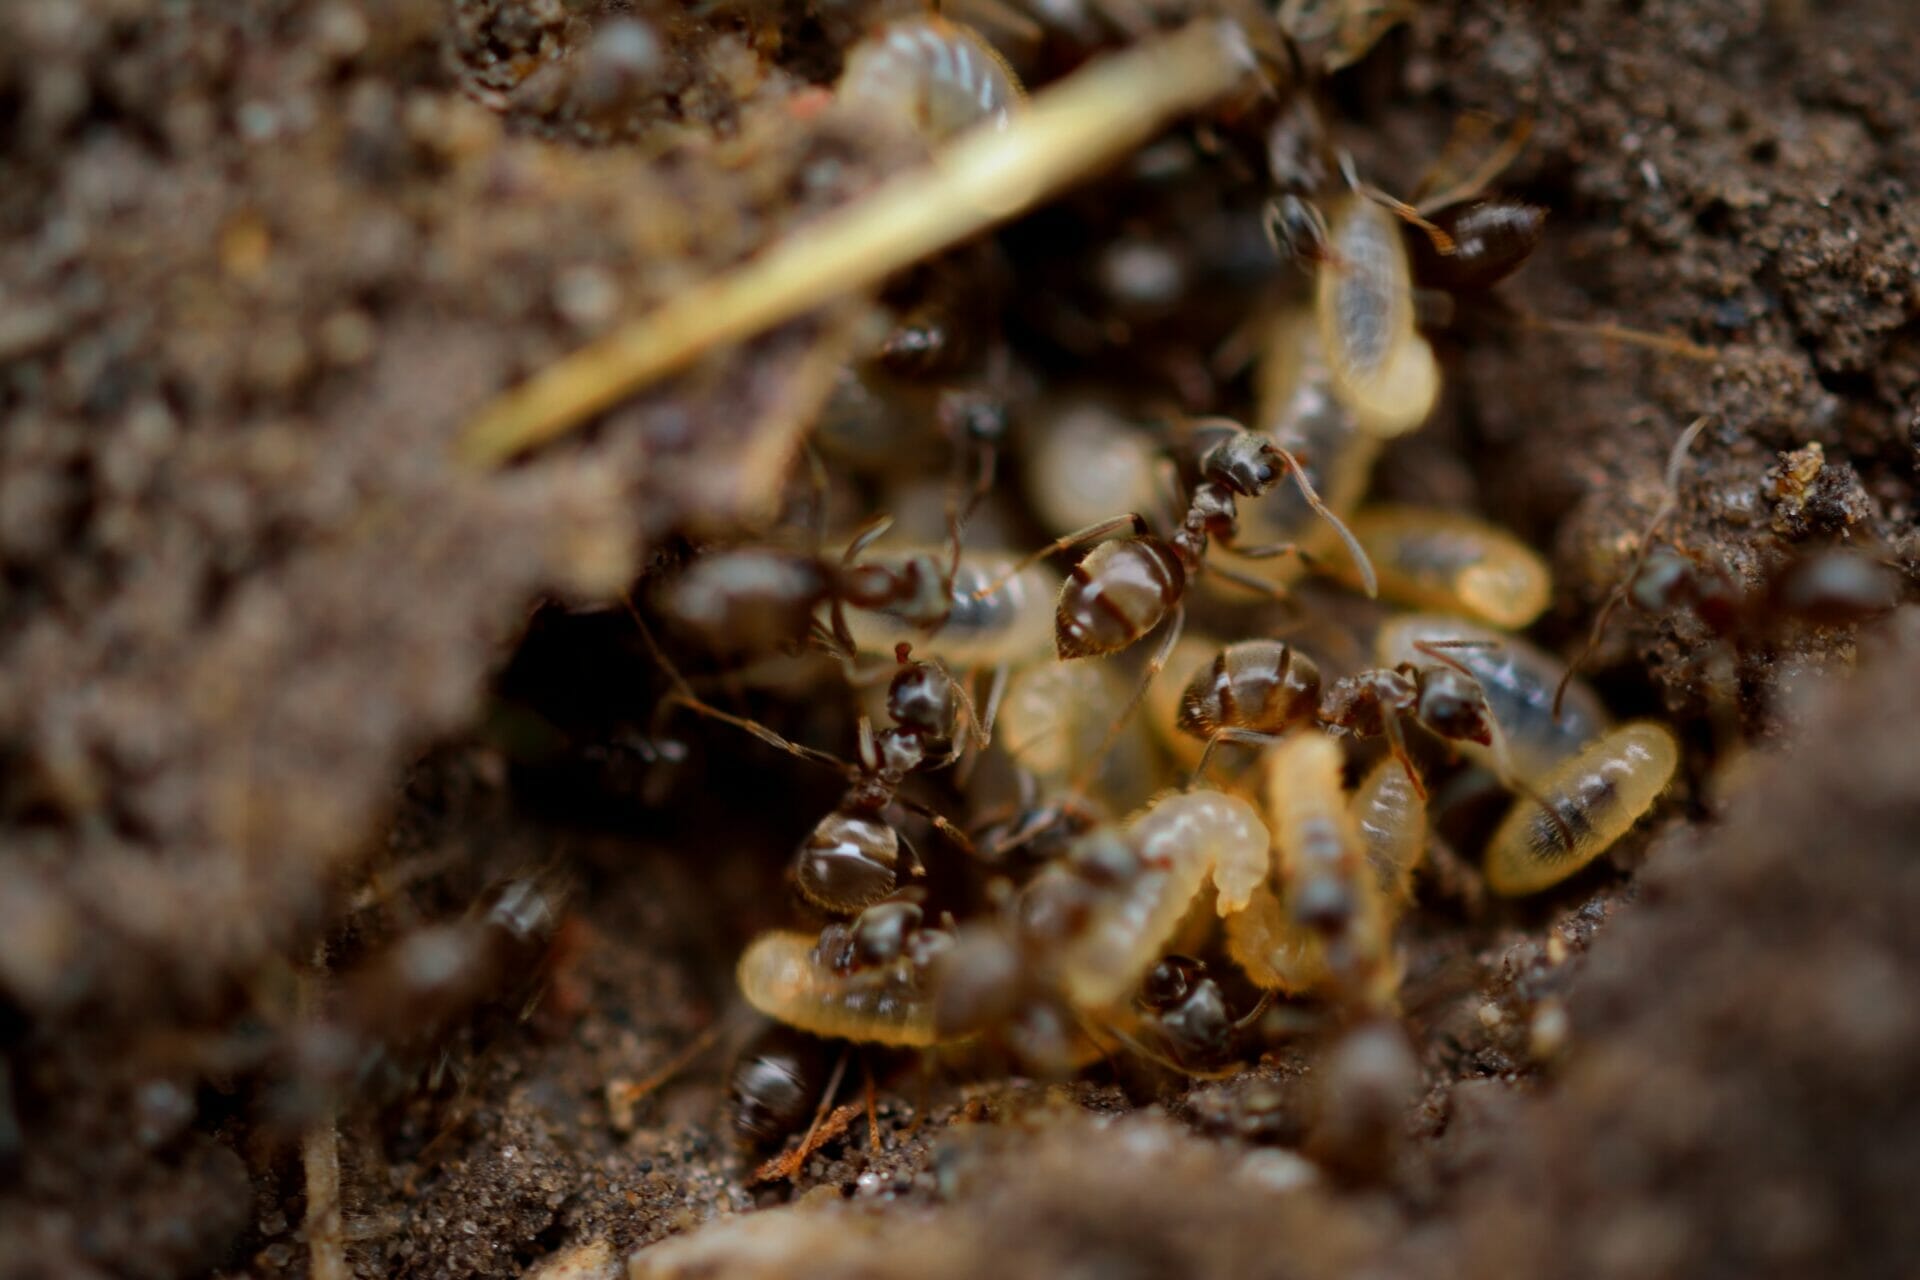 Burrowing Insects in Soil